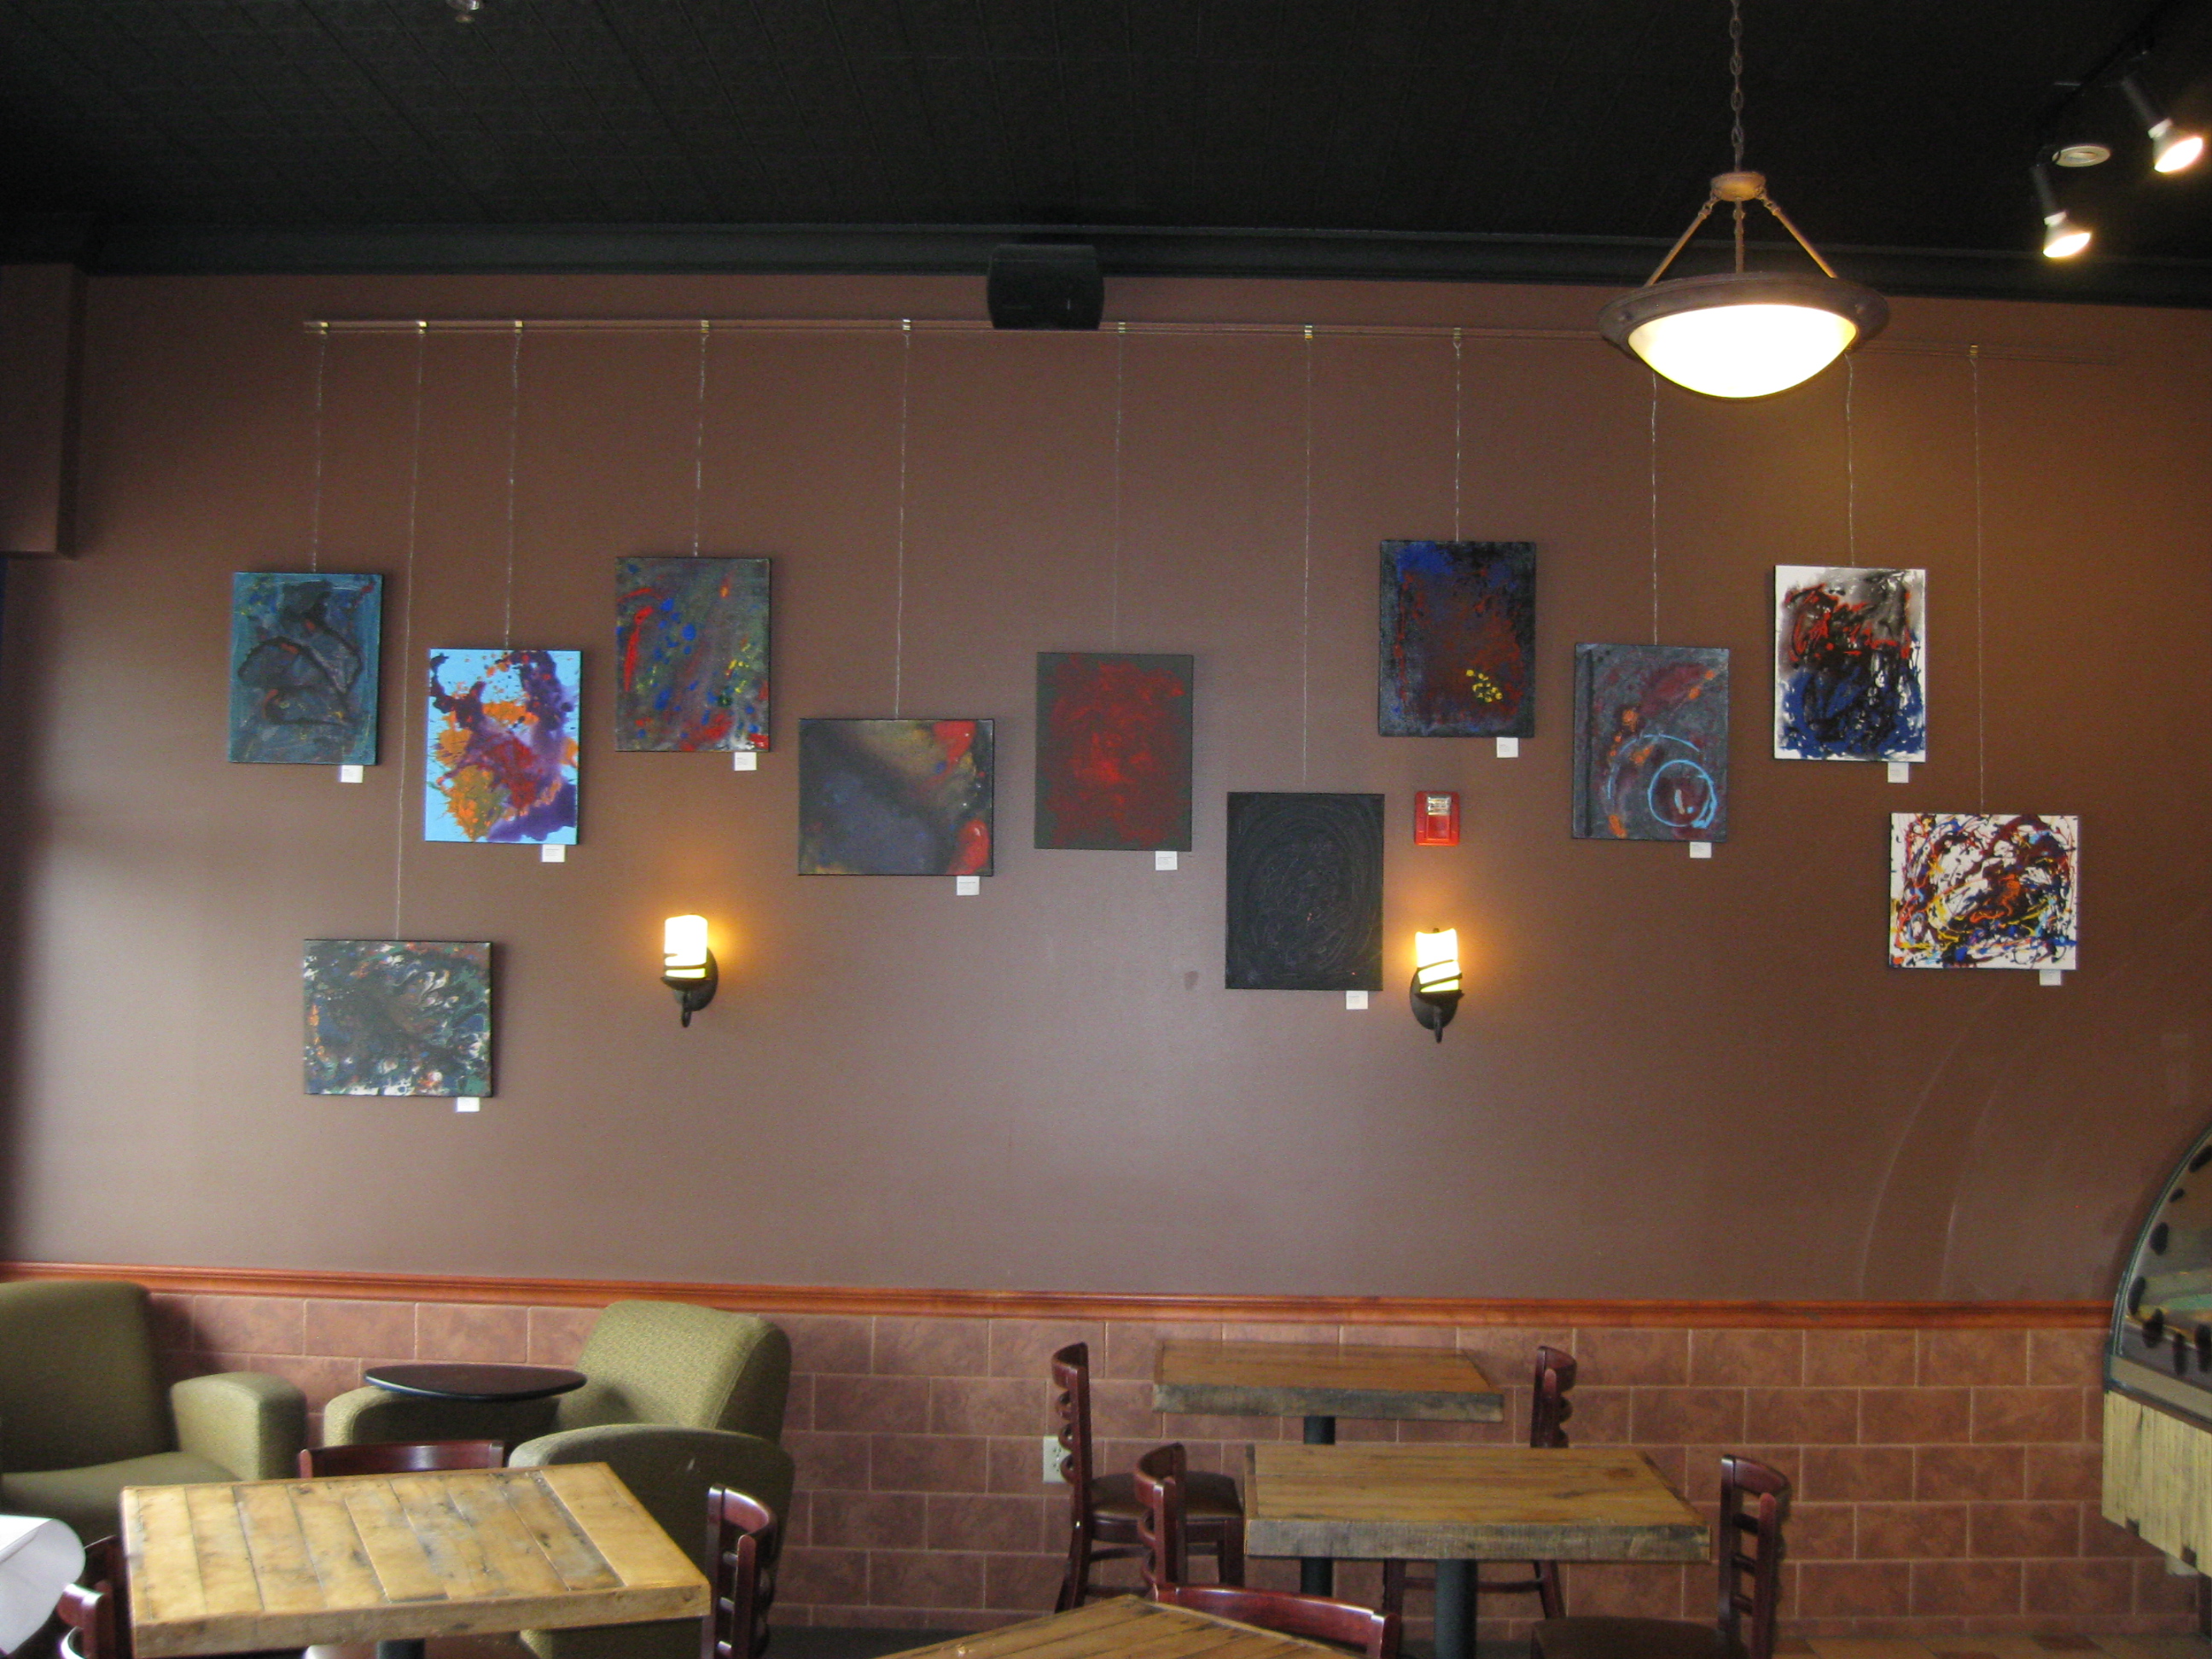 Paintings on display at Barriques on Old Sauk Road, Middleton Wisconsin.